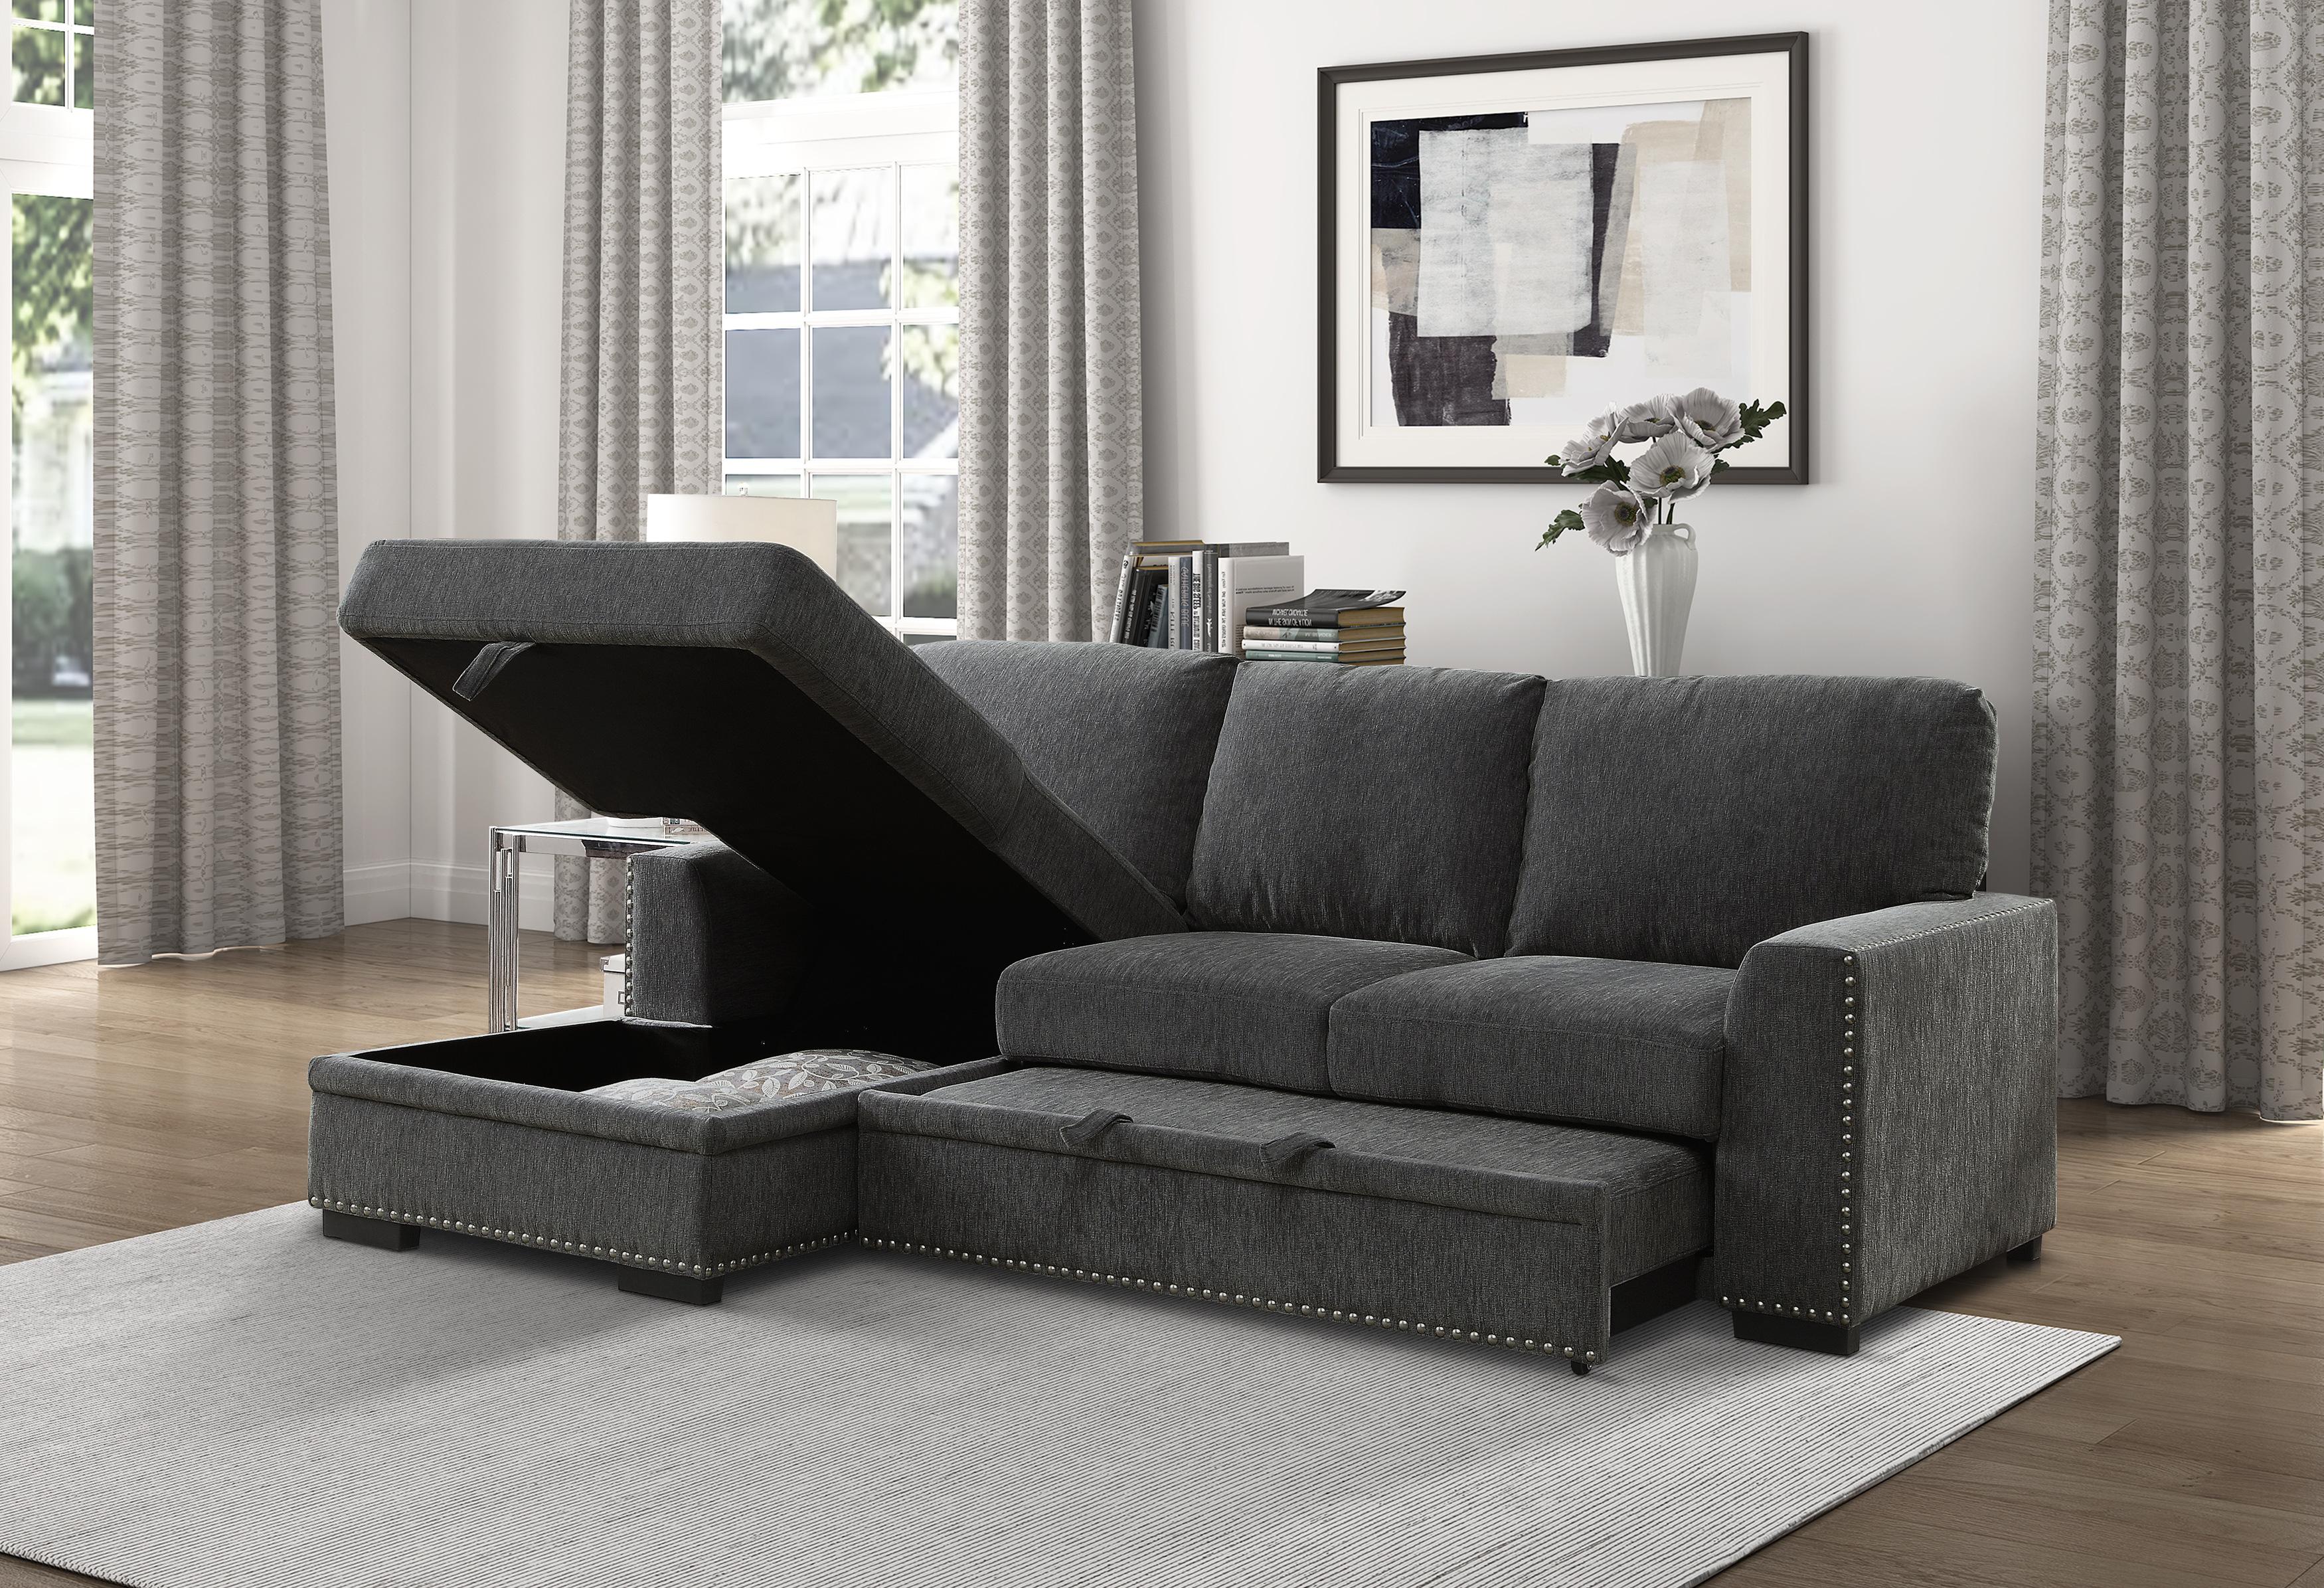 

                    
Buy Modern Charcoal Solid Wood LHC 2-Piece Sectional Homelegance 9468CC*2LC2R Morelia
